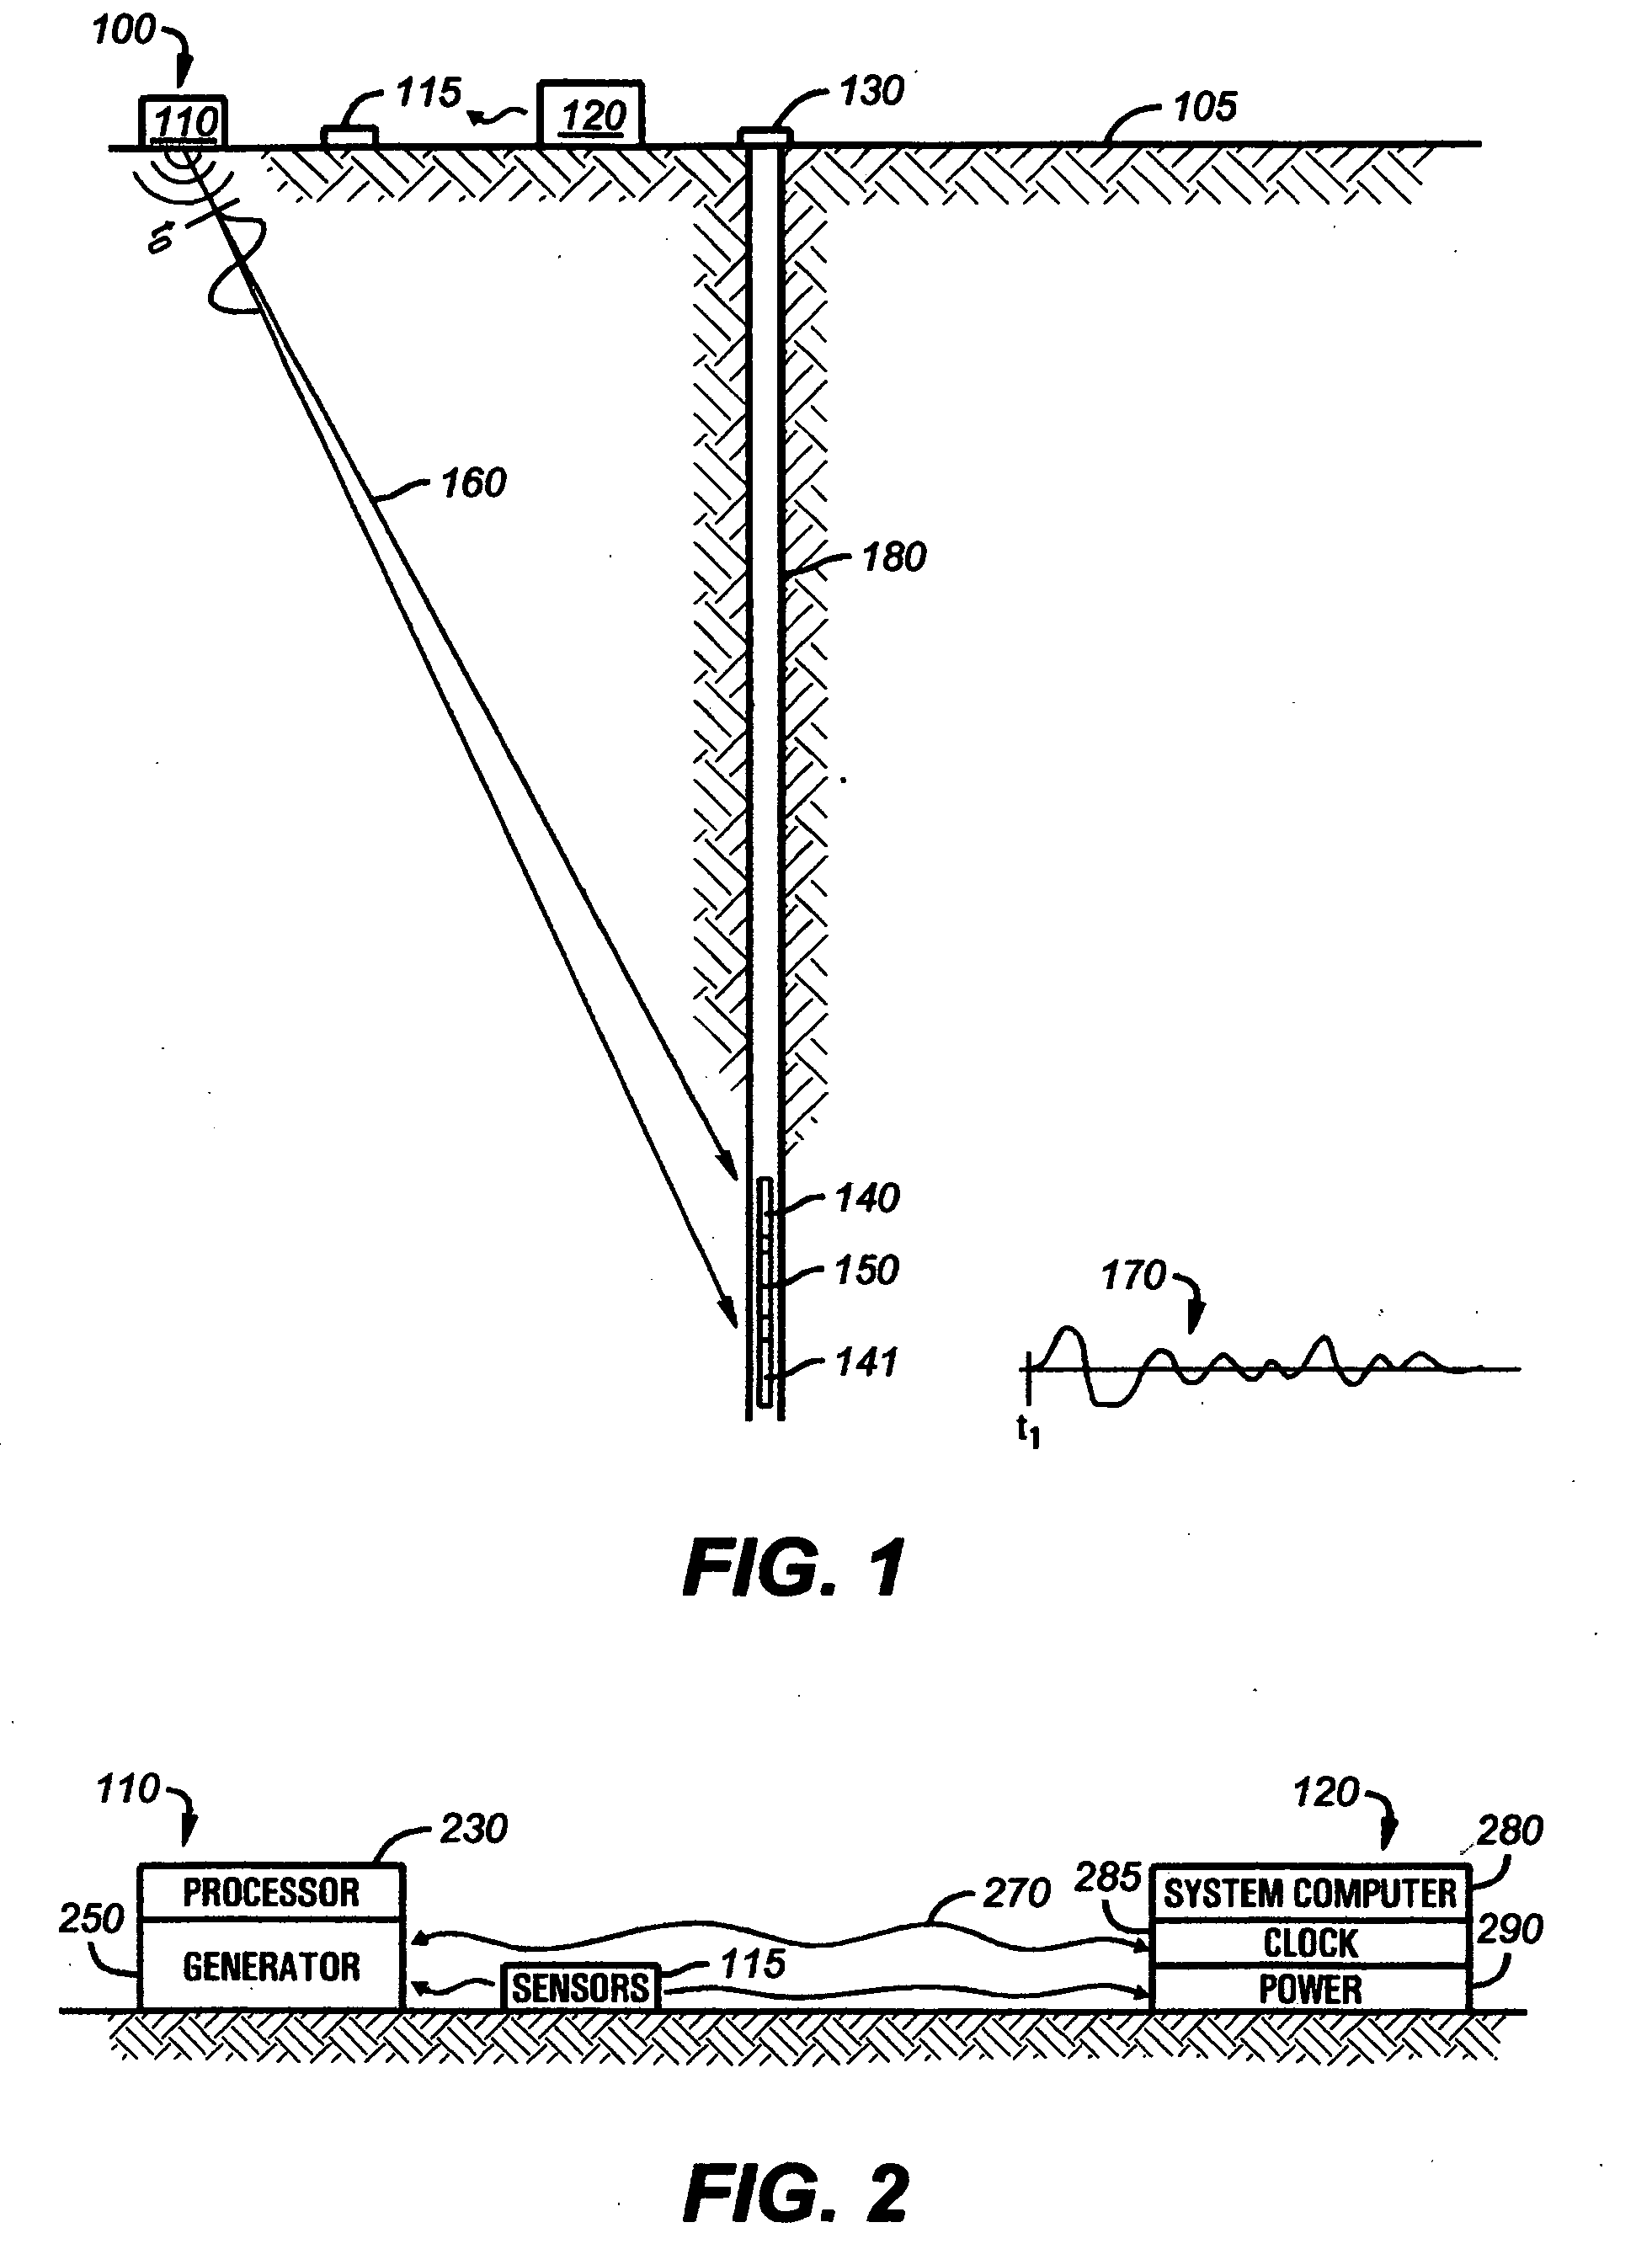 Seismic monitoring and control method